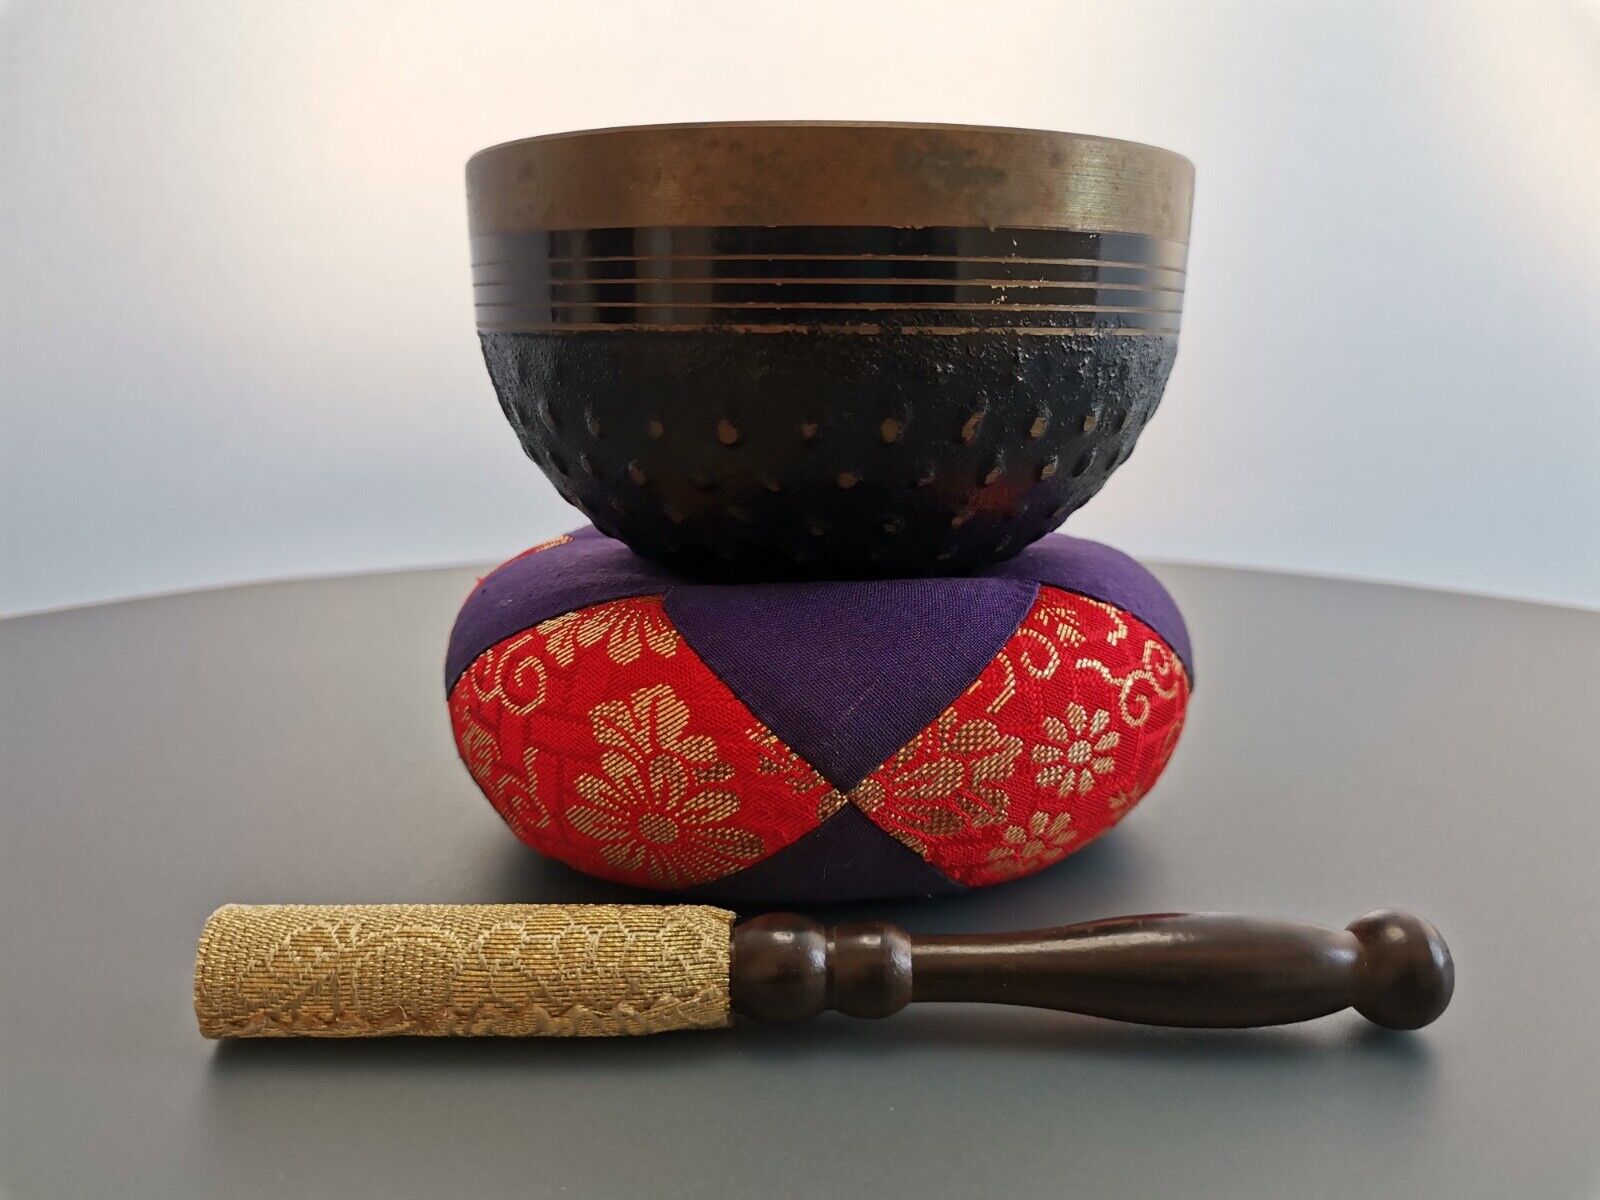 Buddhist Chanting Bell (Rin) Vintage Japanese Temple Sing Bowl Gong Zen 10.5cm